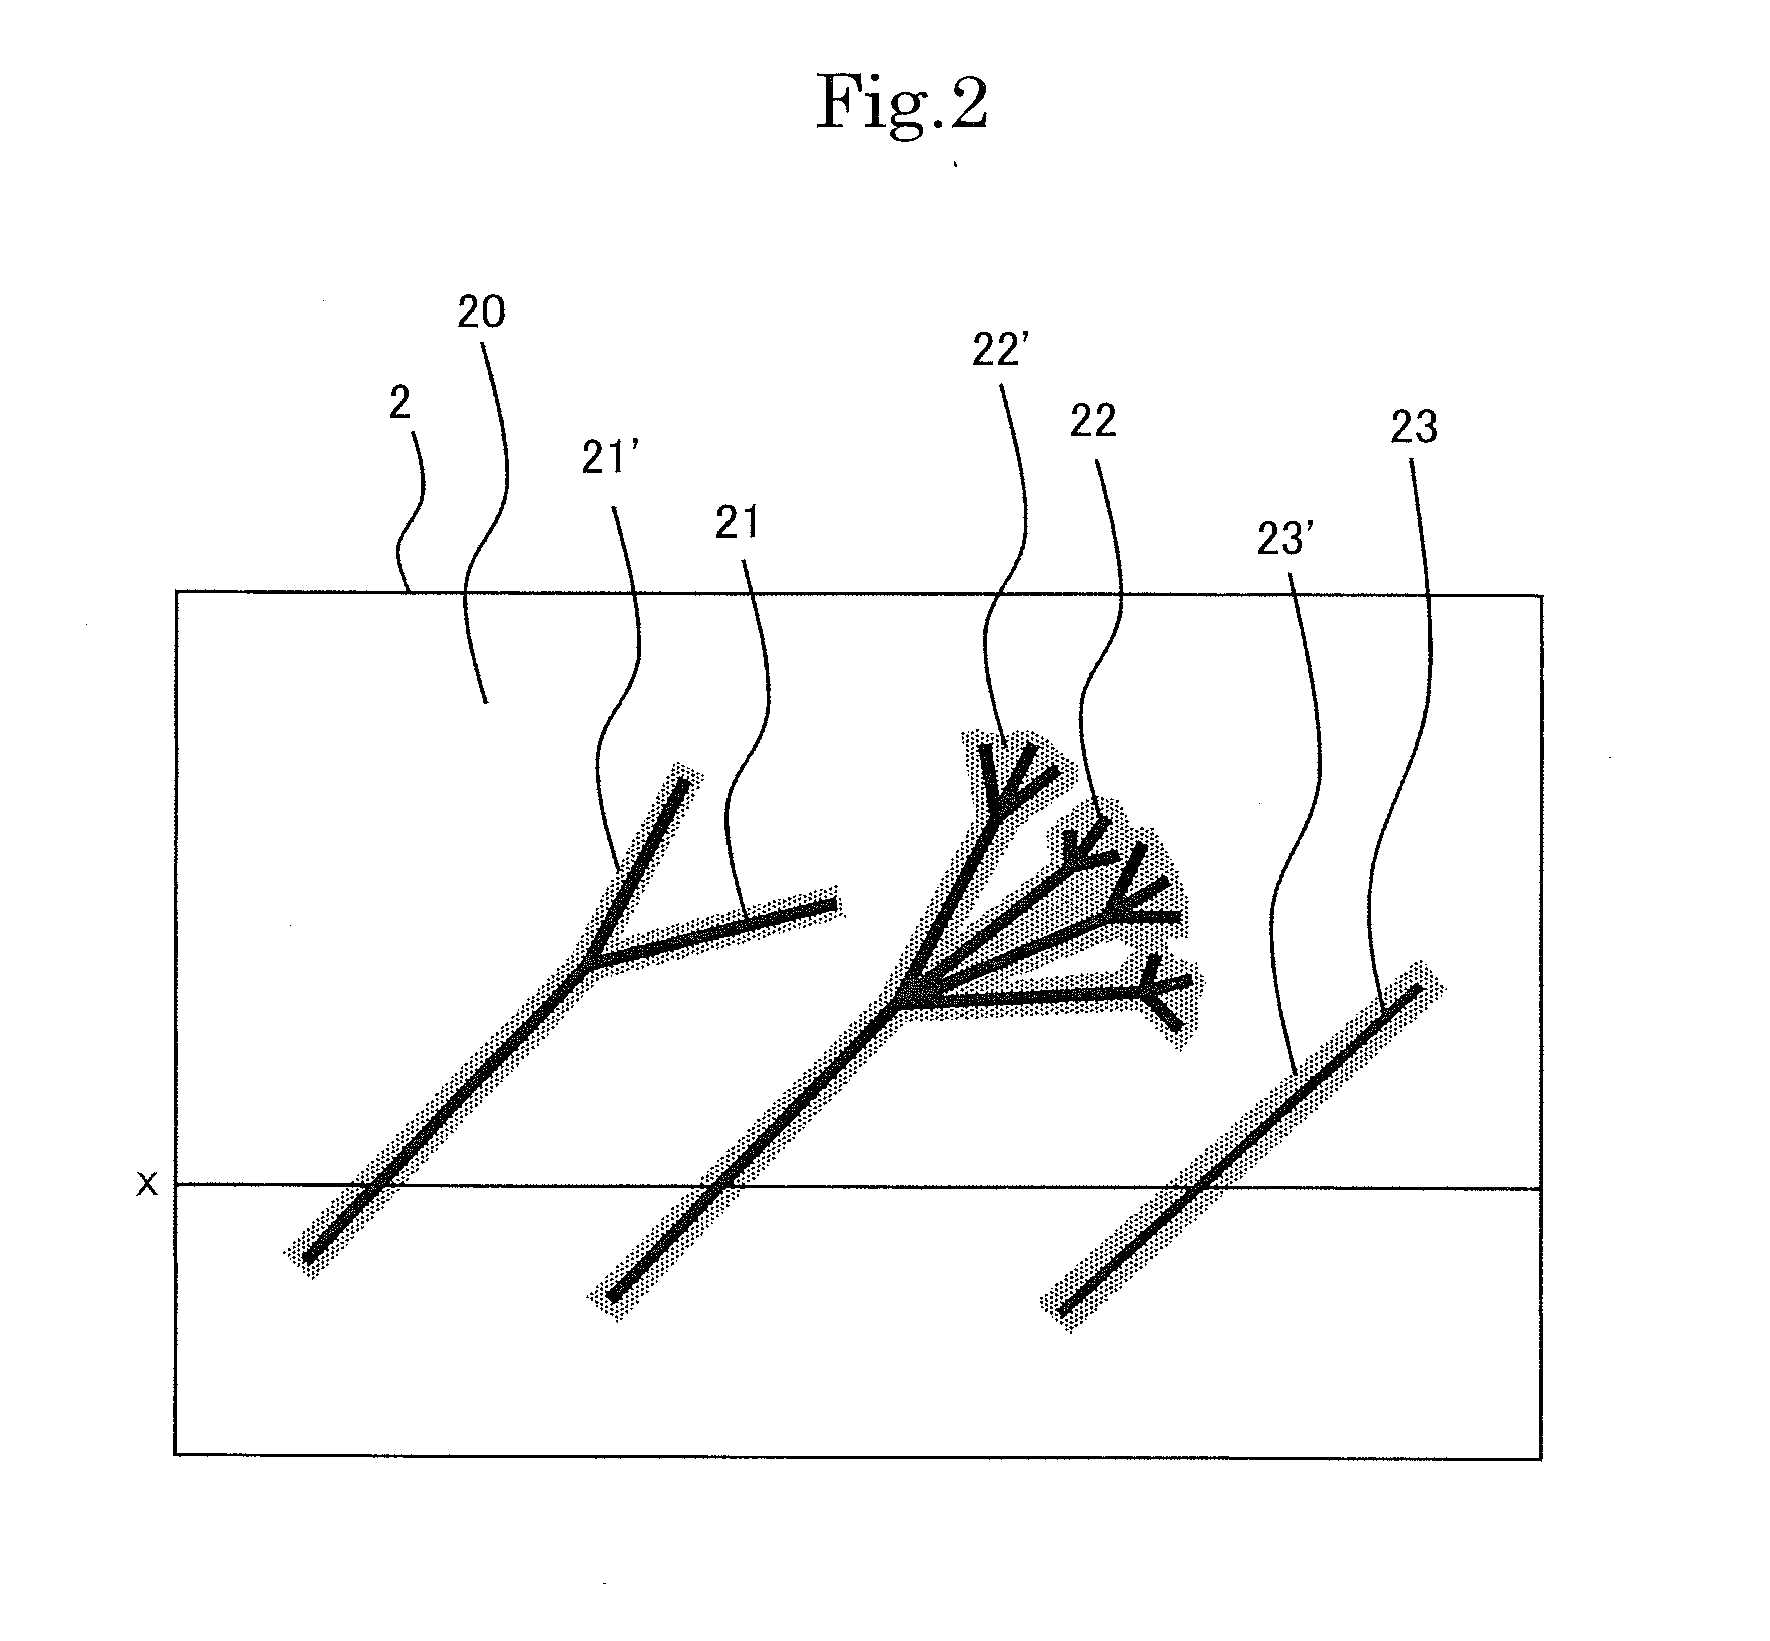 Apparatus and method for determining kind of steel material